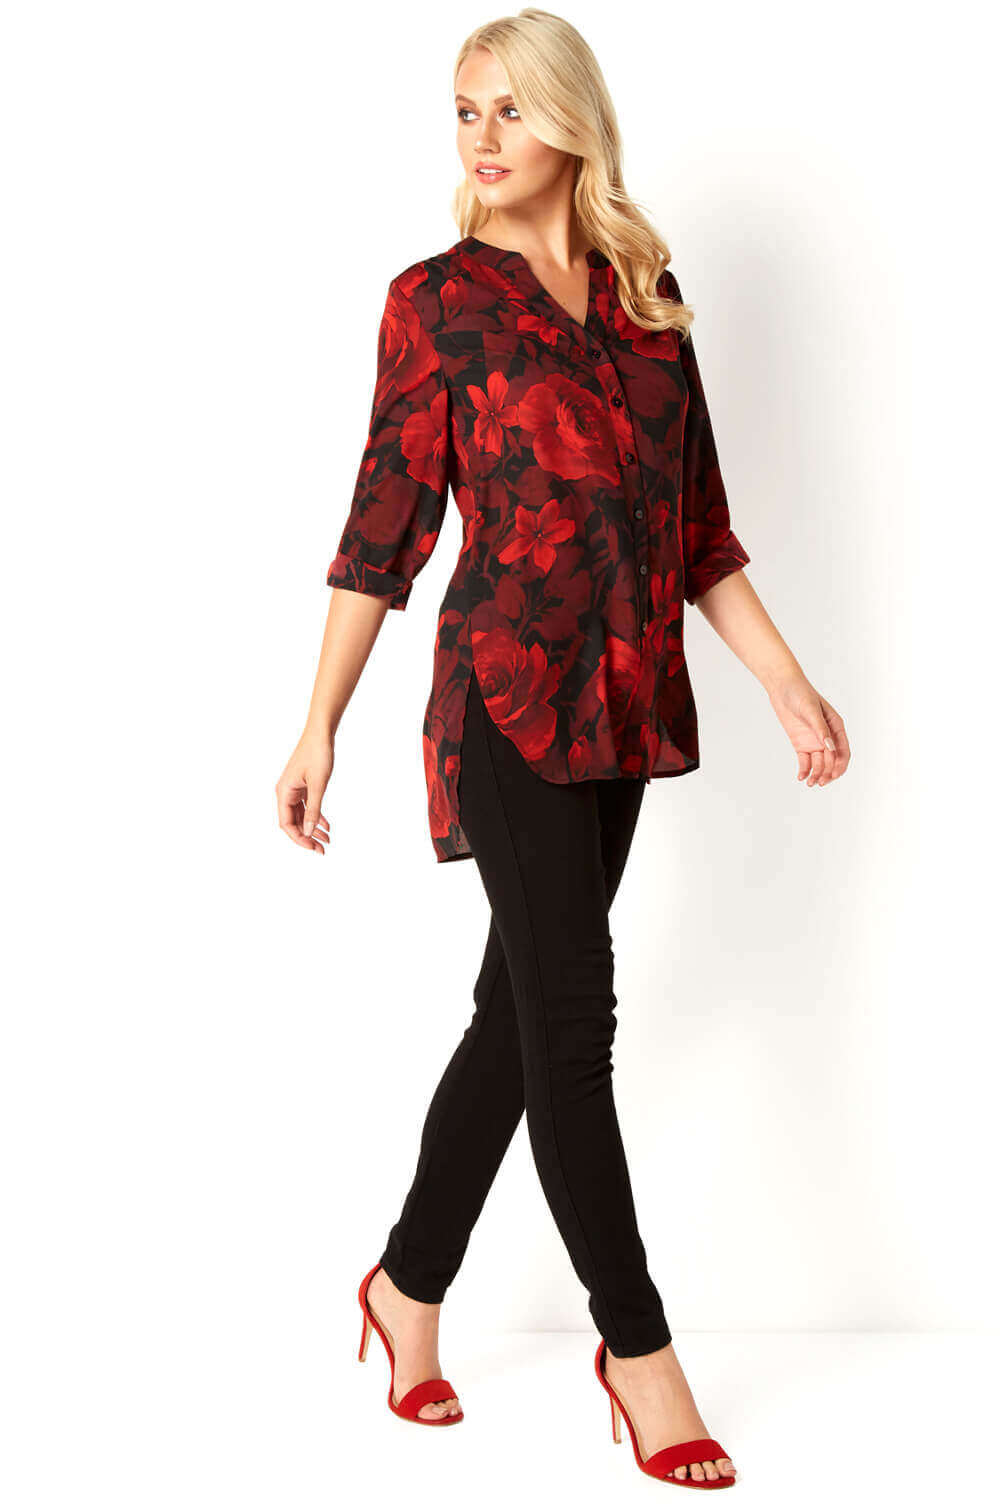 Red 3/4 Sleeve Rose Print Floral Button Up Blouse, Image 2 of 3